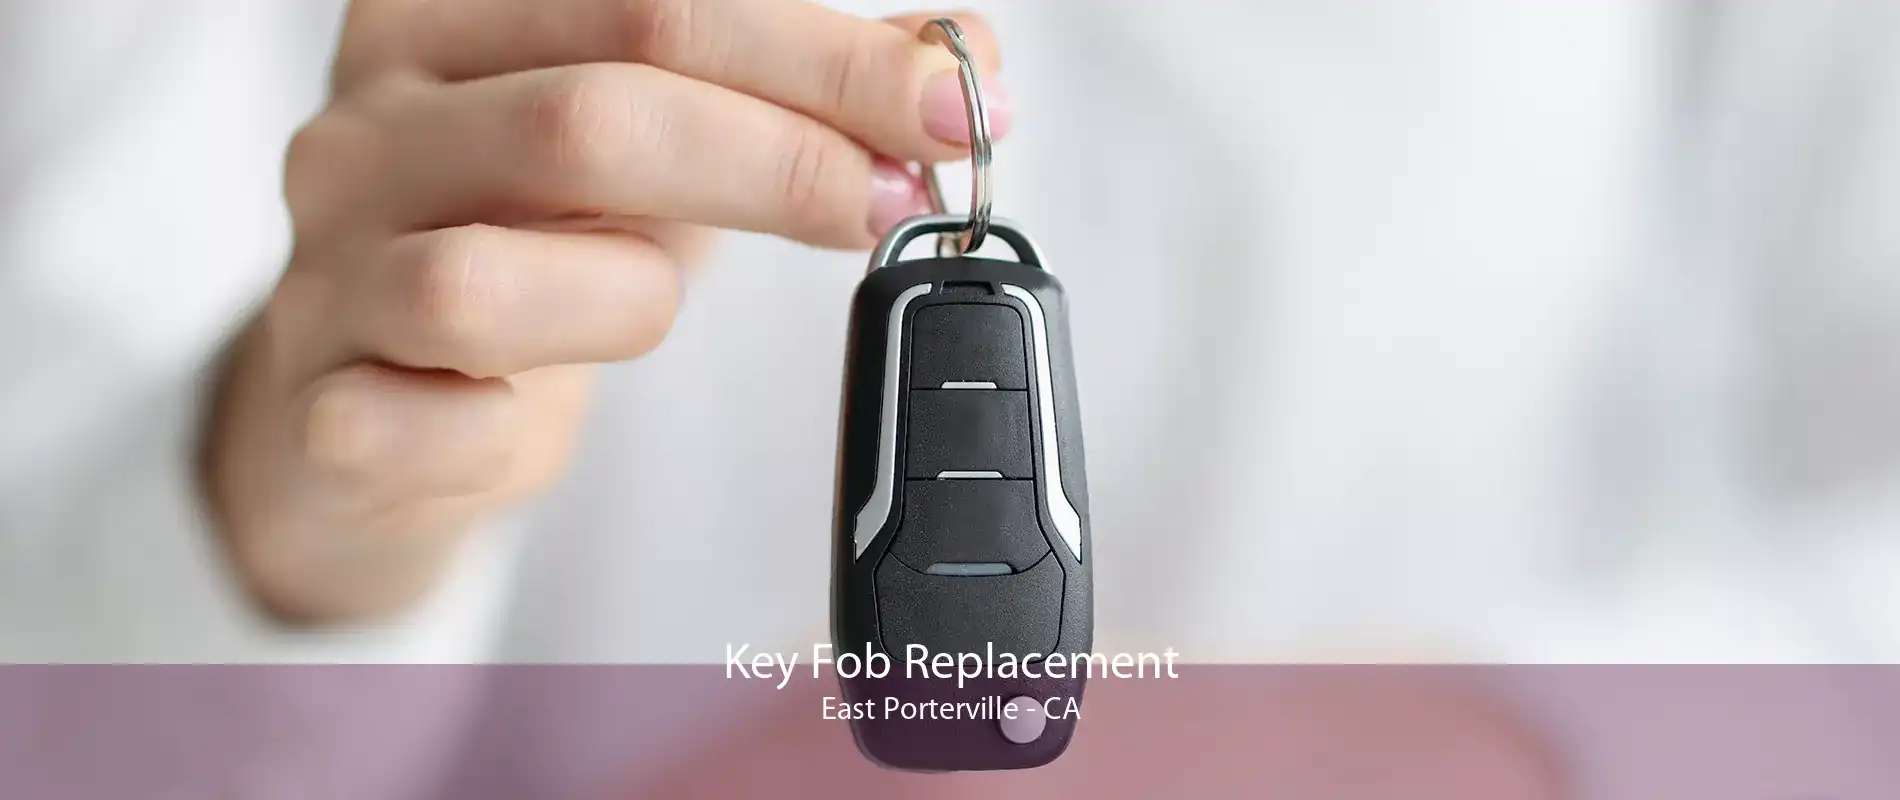 Key Fob Replacement East Porterville - CA